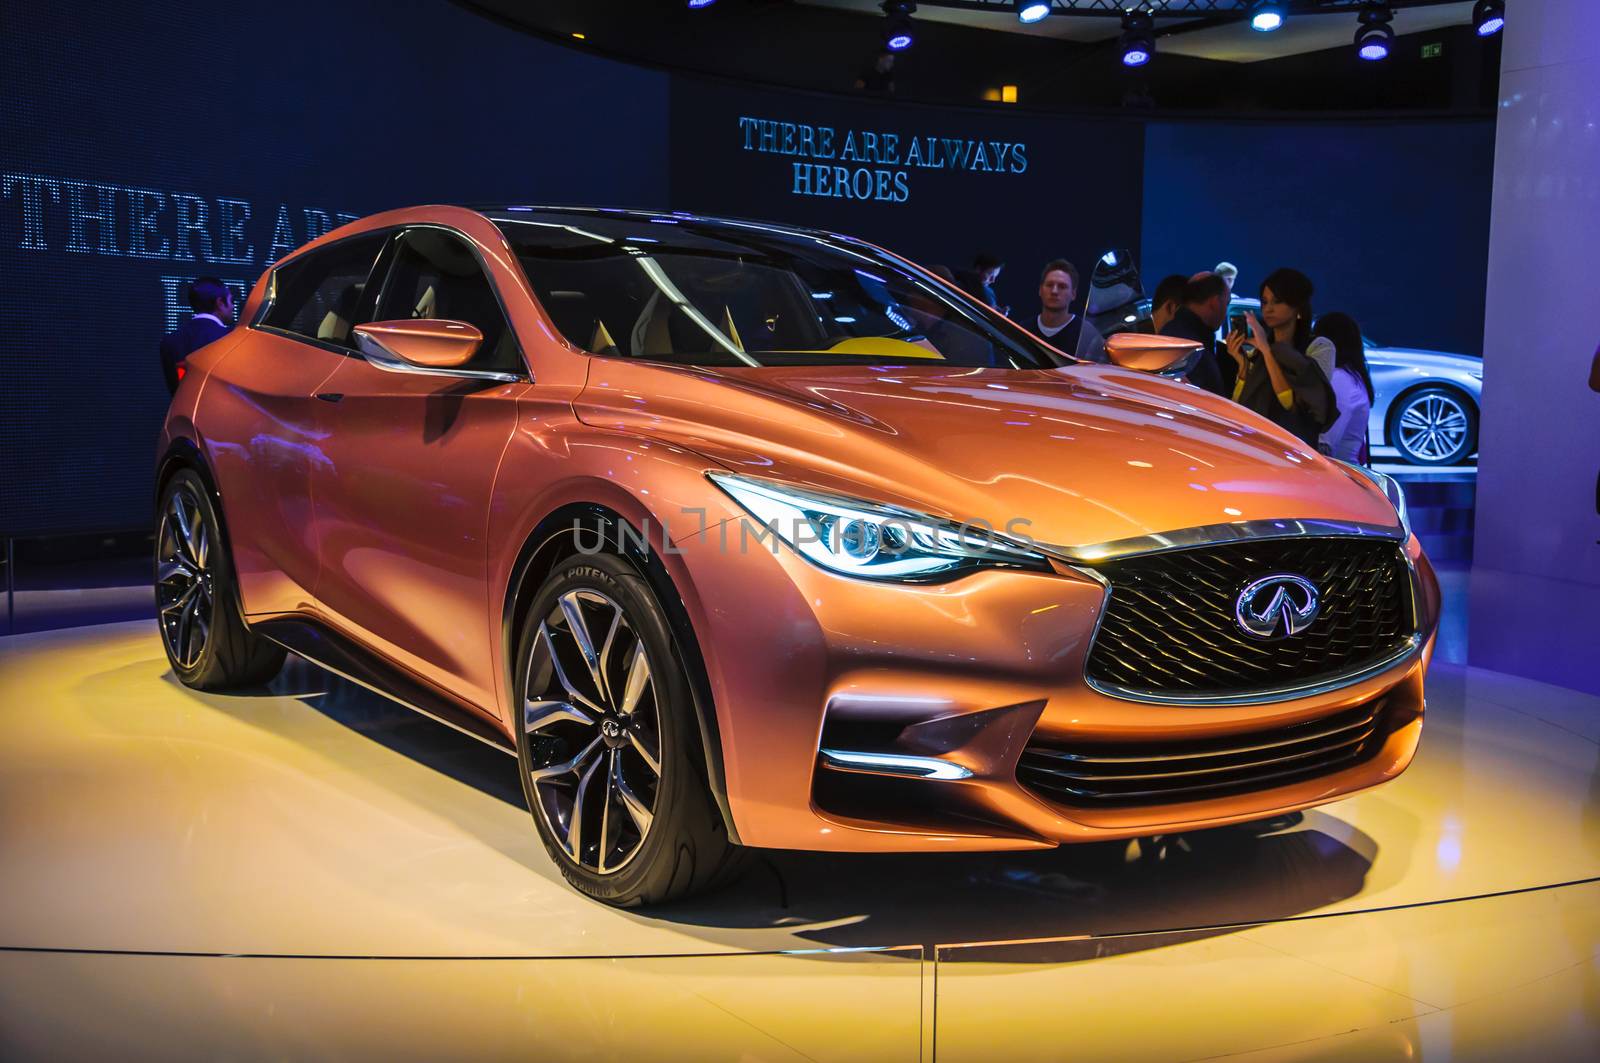 FRANKFURT - SEPT 21: INIFINITY Q30 presented as world premiere at the 65th IAA (Internationale Automobil Ausstellung) on September 21, 2013 in Frankfurt, Germany